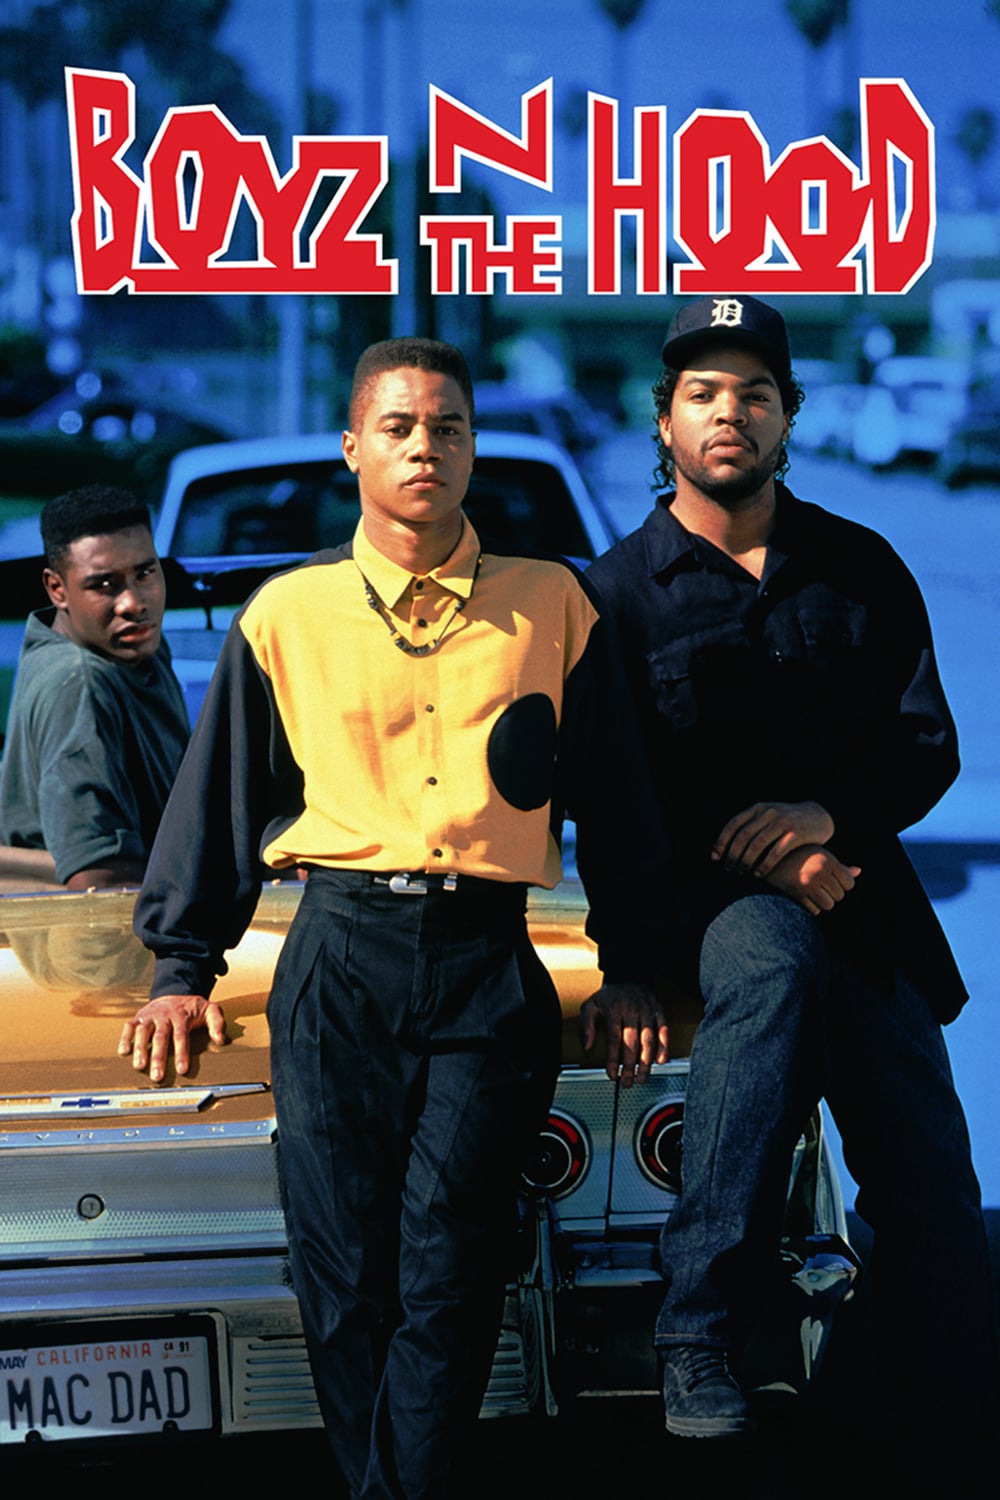 Poster for the movie "Boyz n the Hood"